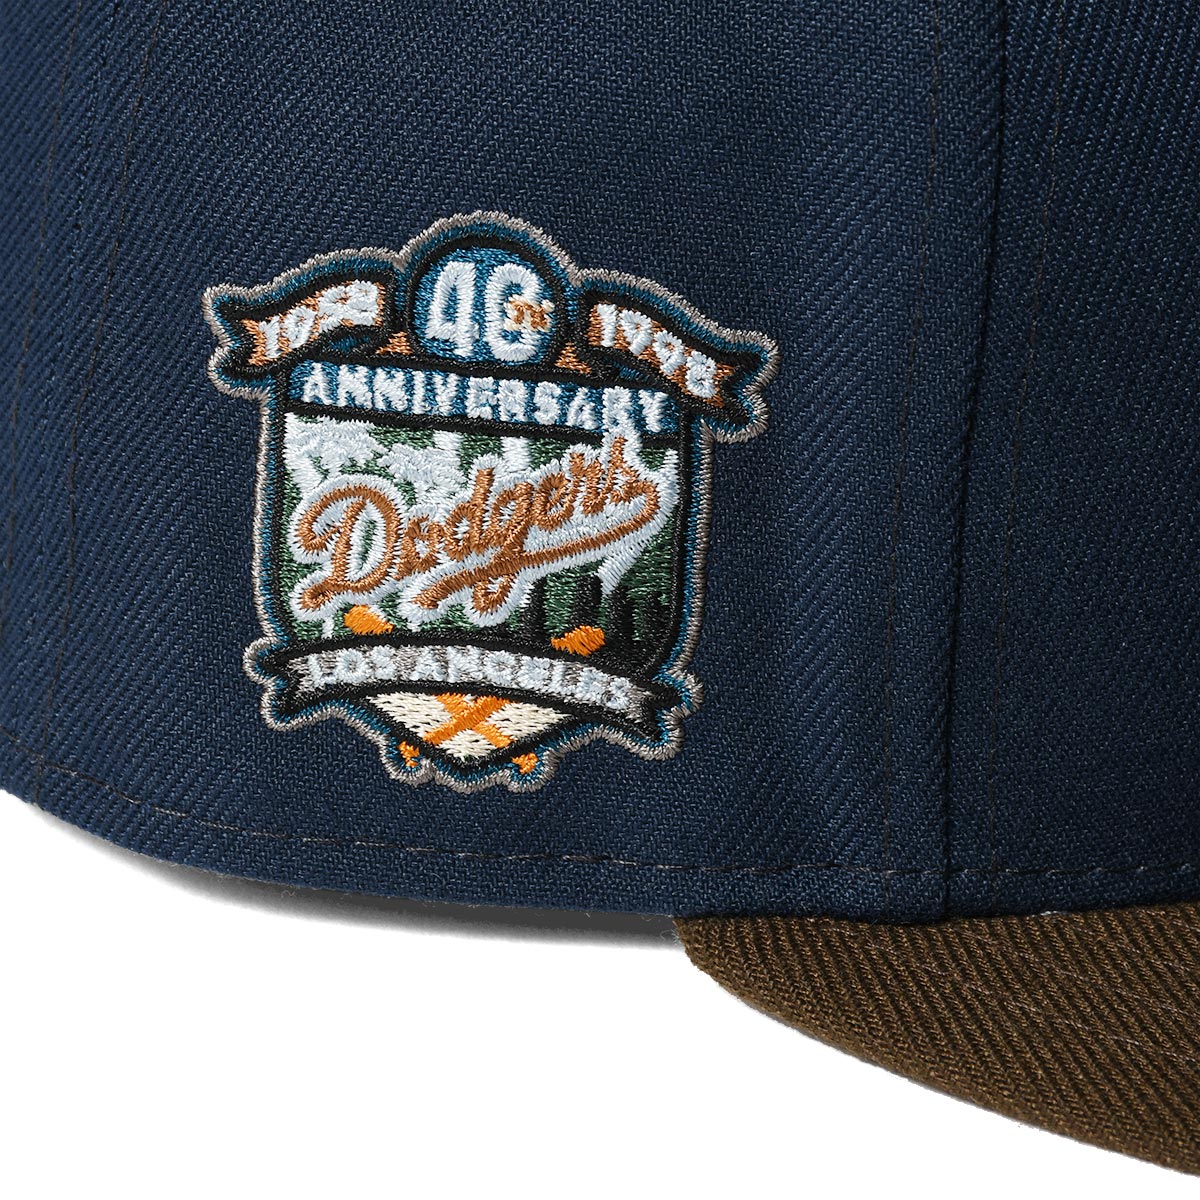 NEW ERA Los Angeles Dodgers - 40th ANV 59FIFTY OCEANSIDE【13748375】